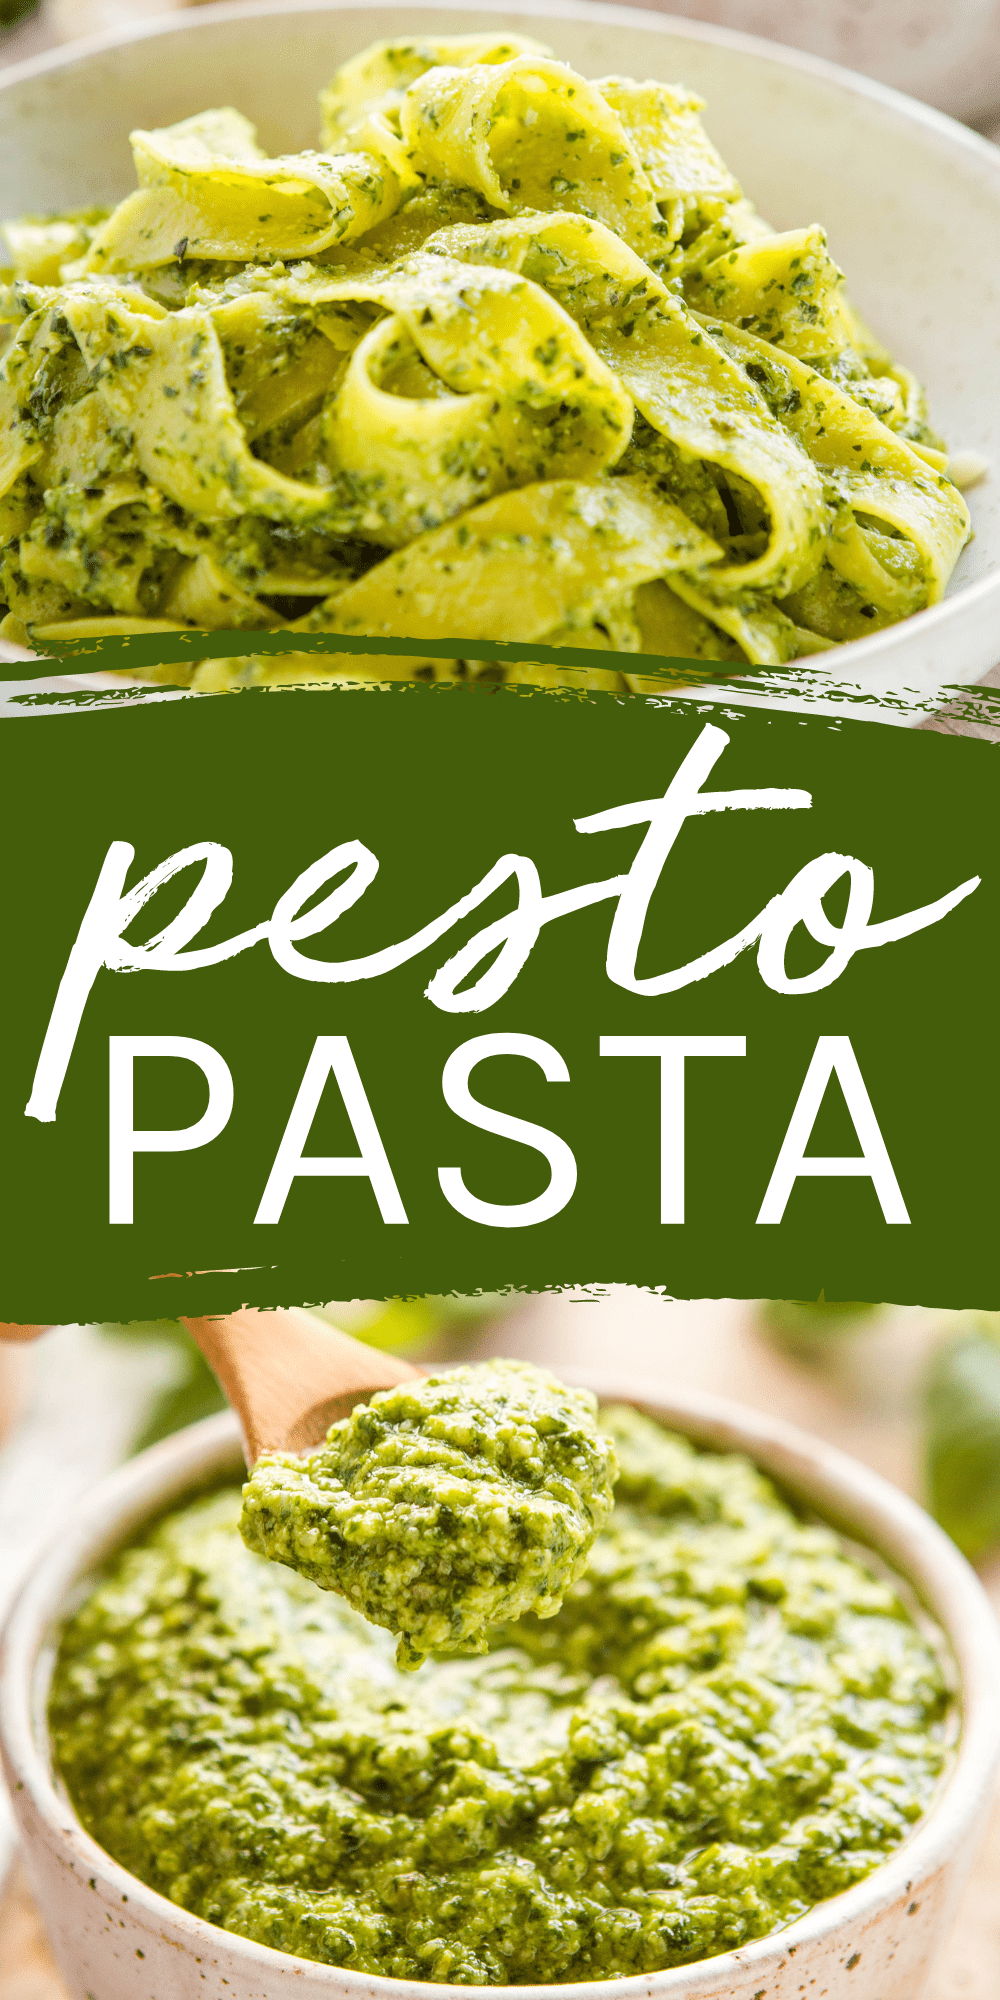 This Pesto Pasta recipe is an easy-to-make homemade basil pesto sauce made with a healthy secret ingredient and served with fresh pasta. Ready in 20 minutes or less! Recipe from thebusybaker.ca! #pestopasta #howtomakepesto #basilpestopasta #pestorecipe #homemadepesto via @busybakerblog